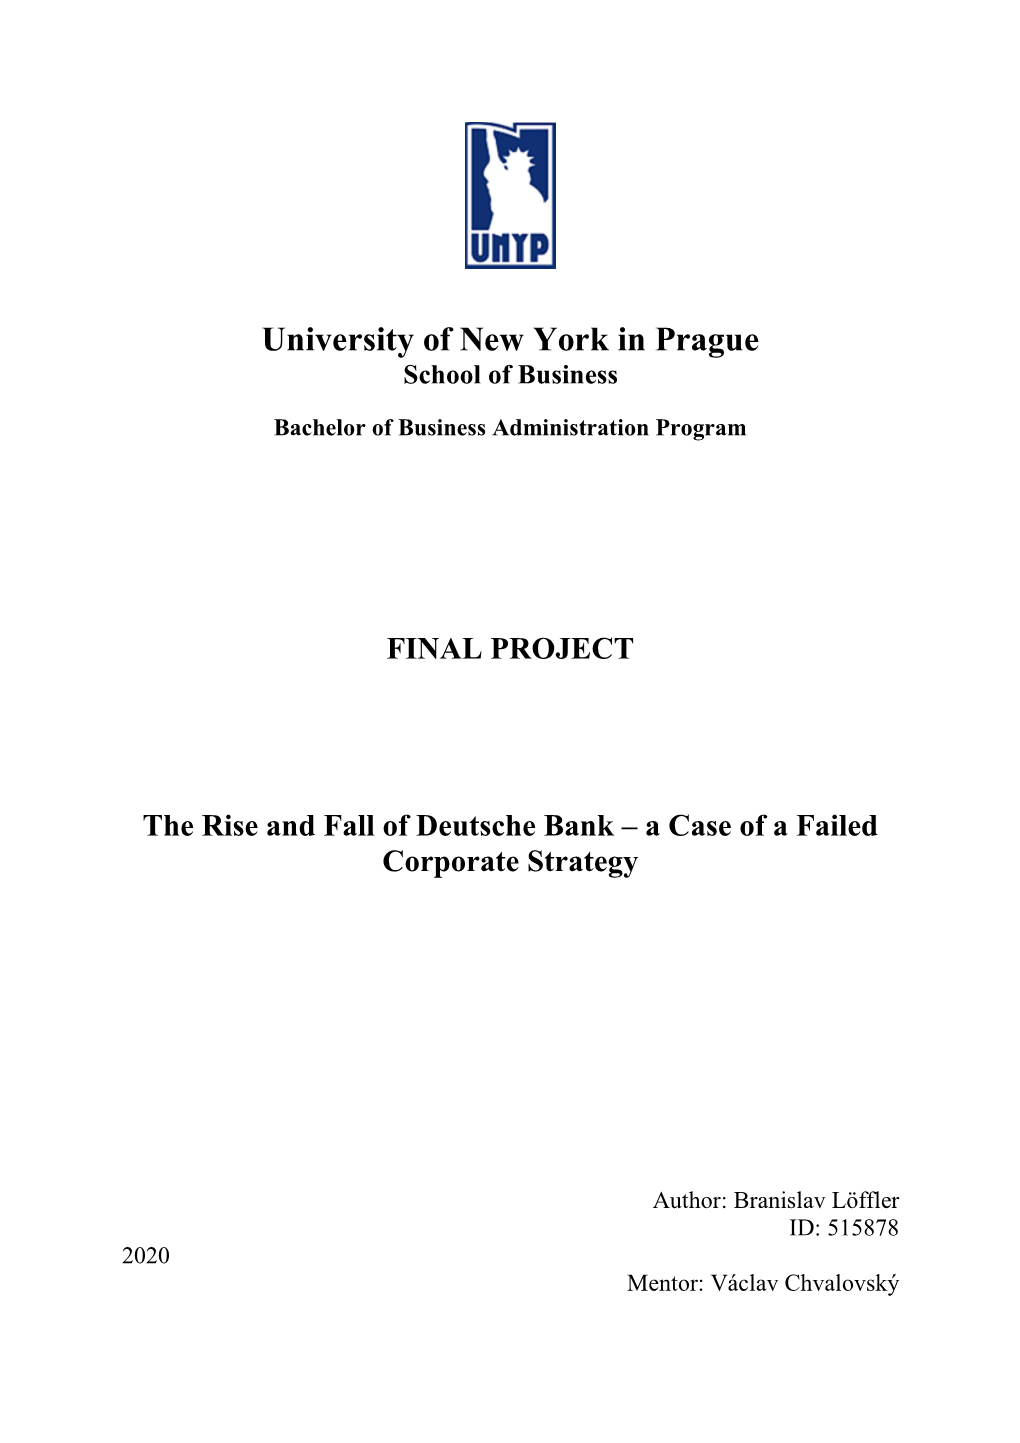 FINAL PROJECT the Rise and Fall Of